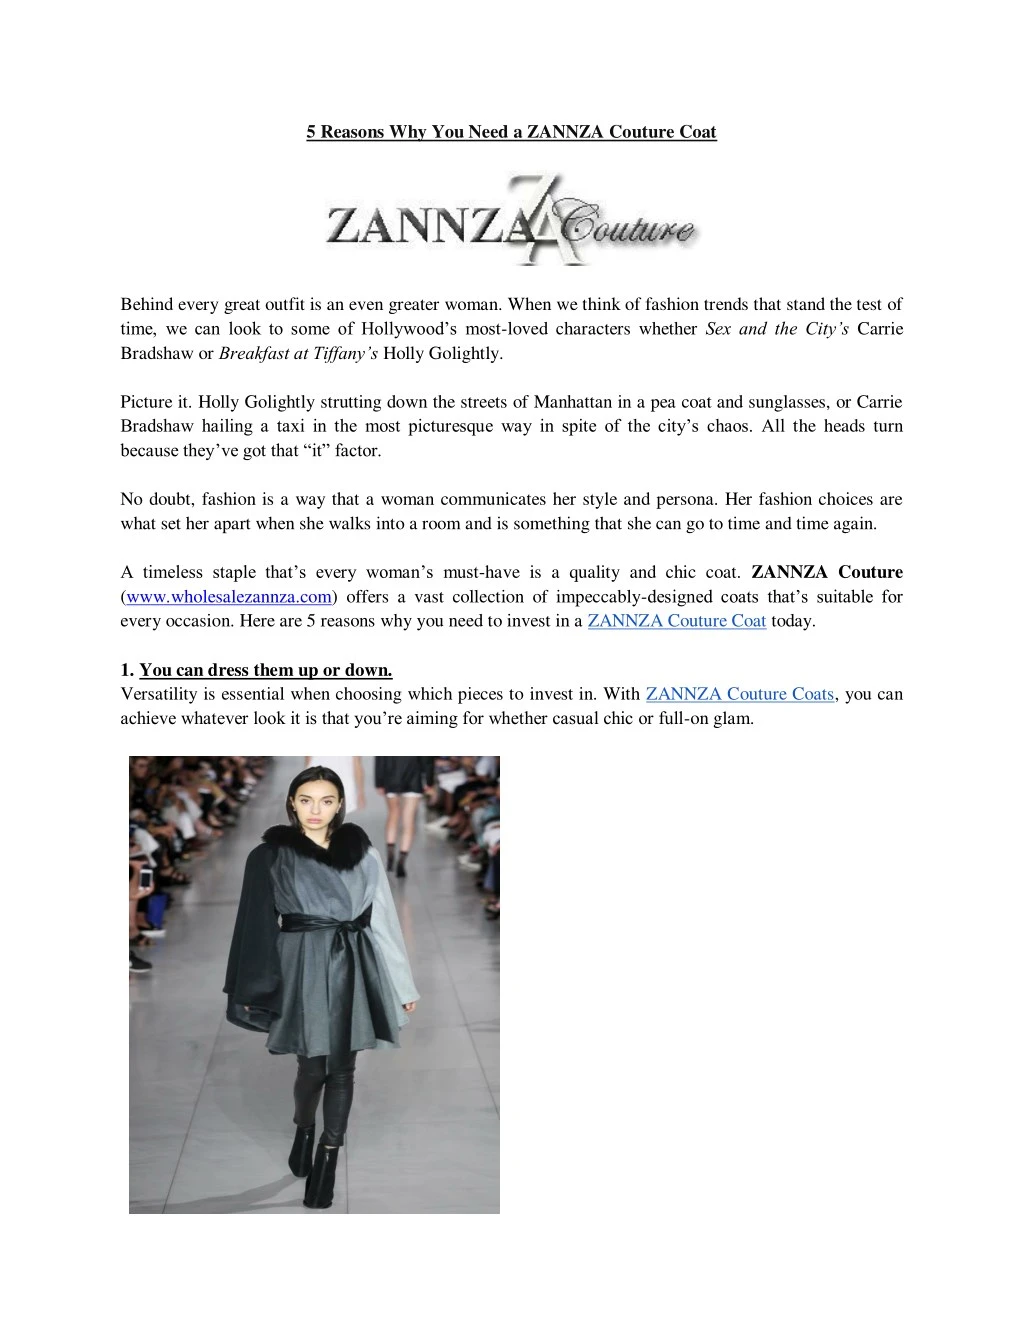 5 reasons why you need a zannza couture coat